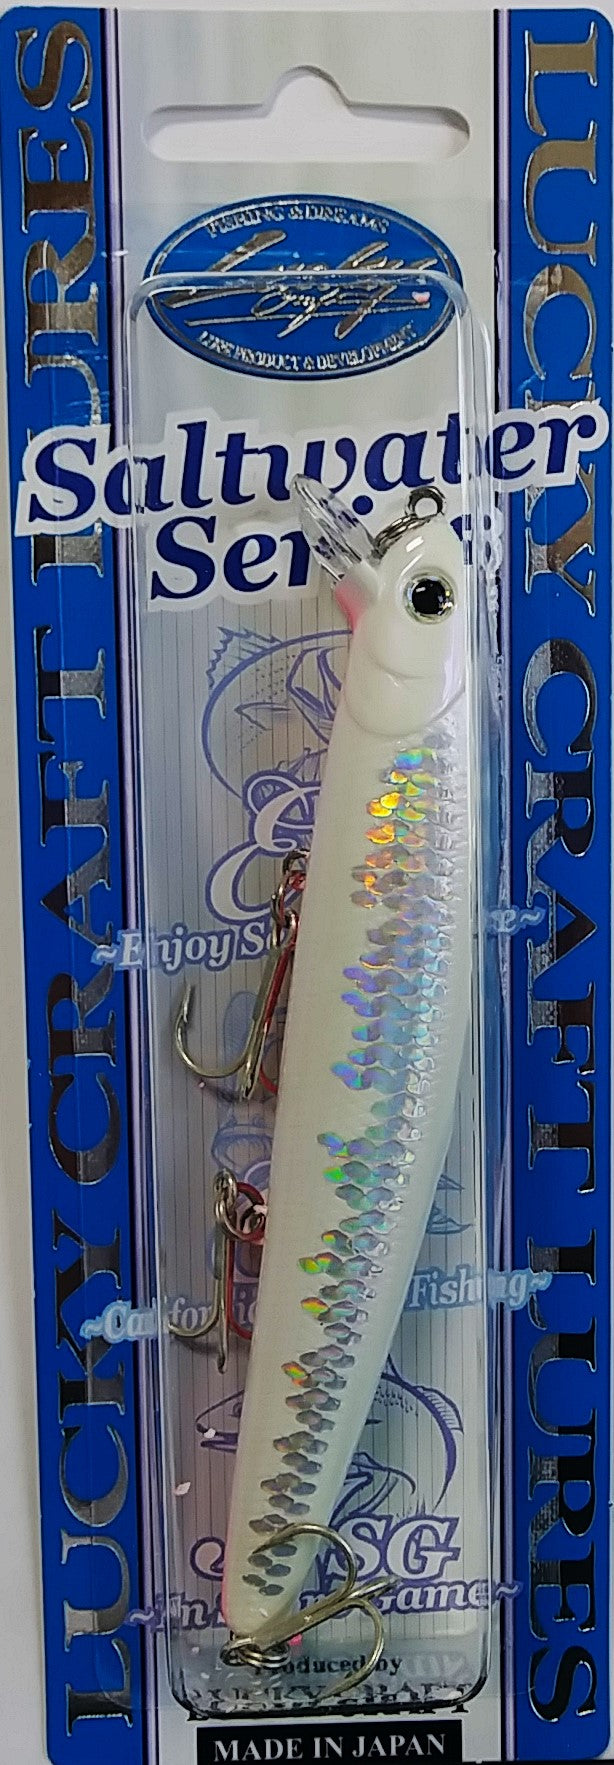 Lucky Craft Saltwater Flash Minnow 110 – Been There Caught That